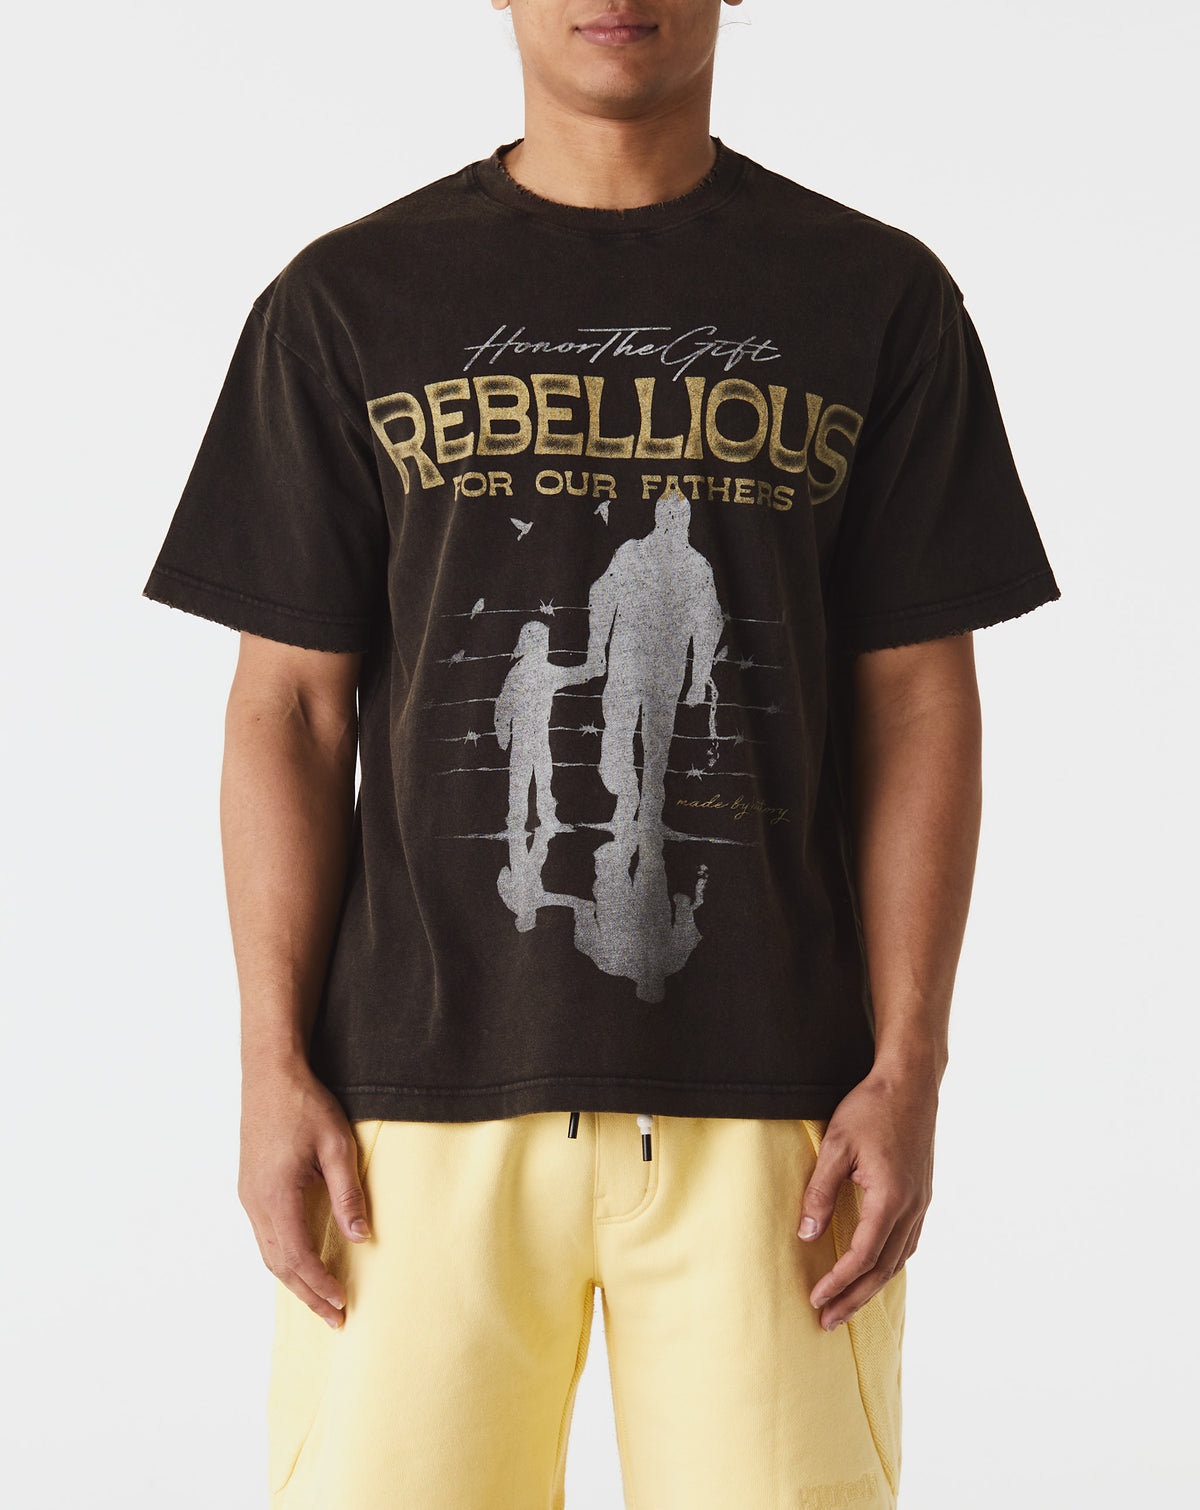 Honor The Gift Rebellious For Our Fathers T-Shirt - Rule of Next Apparel